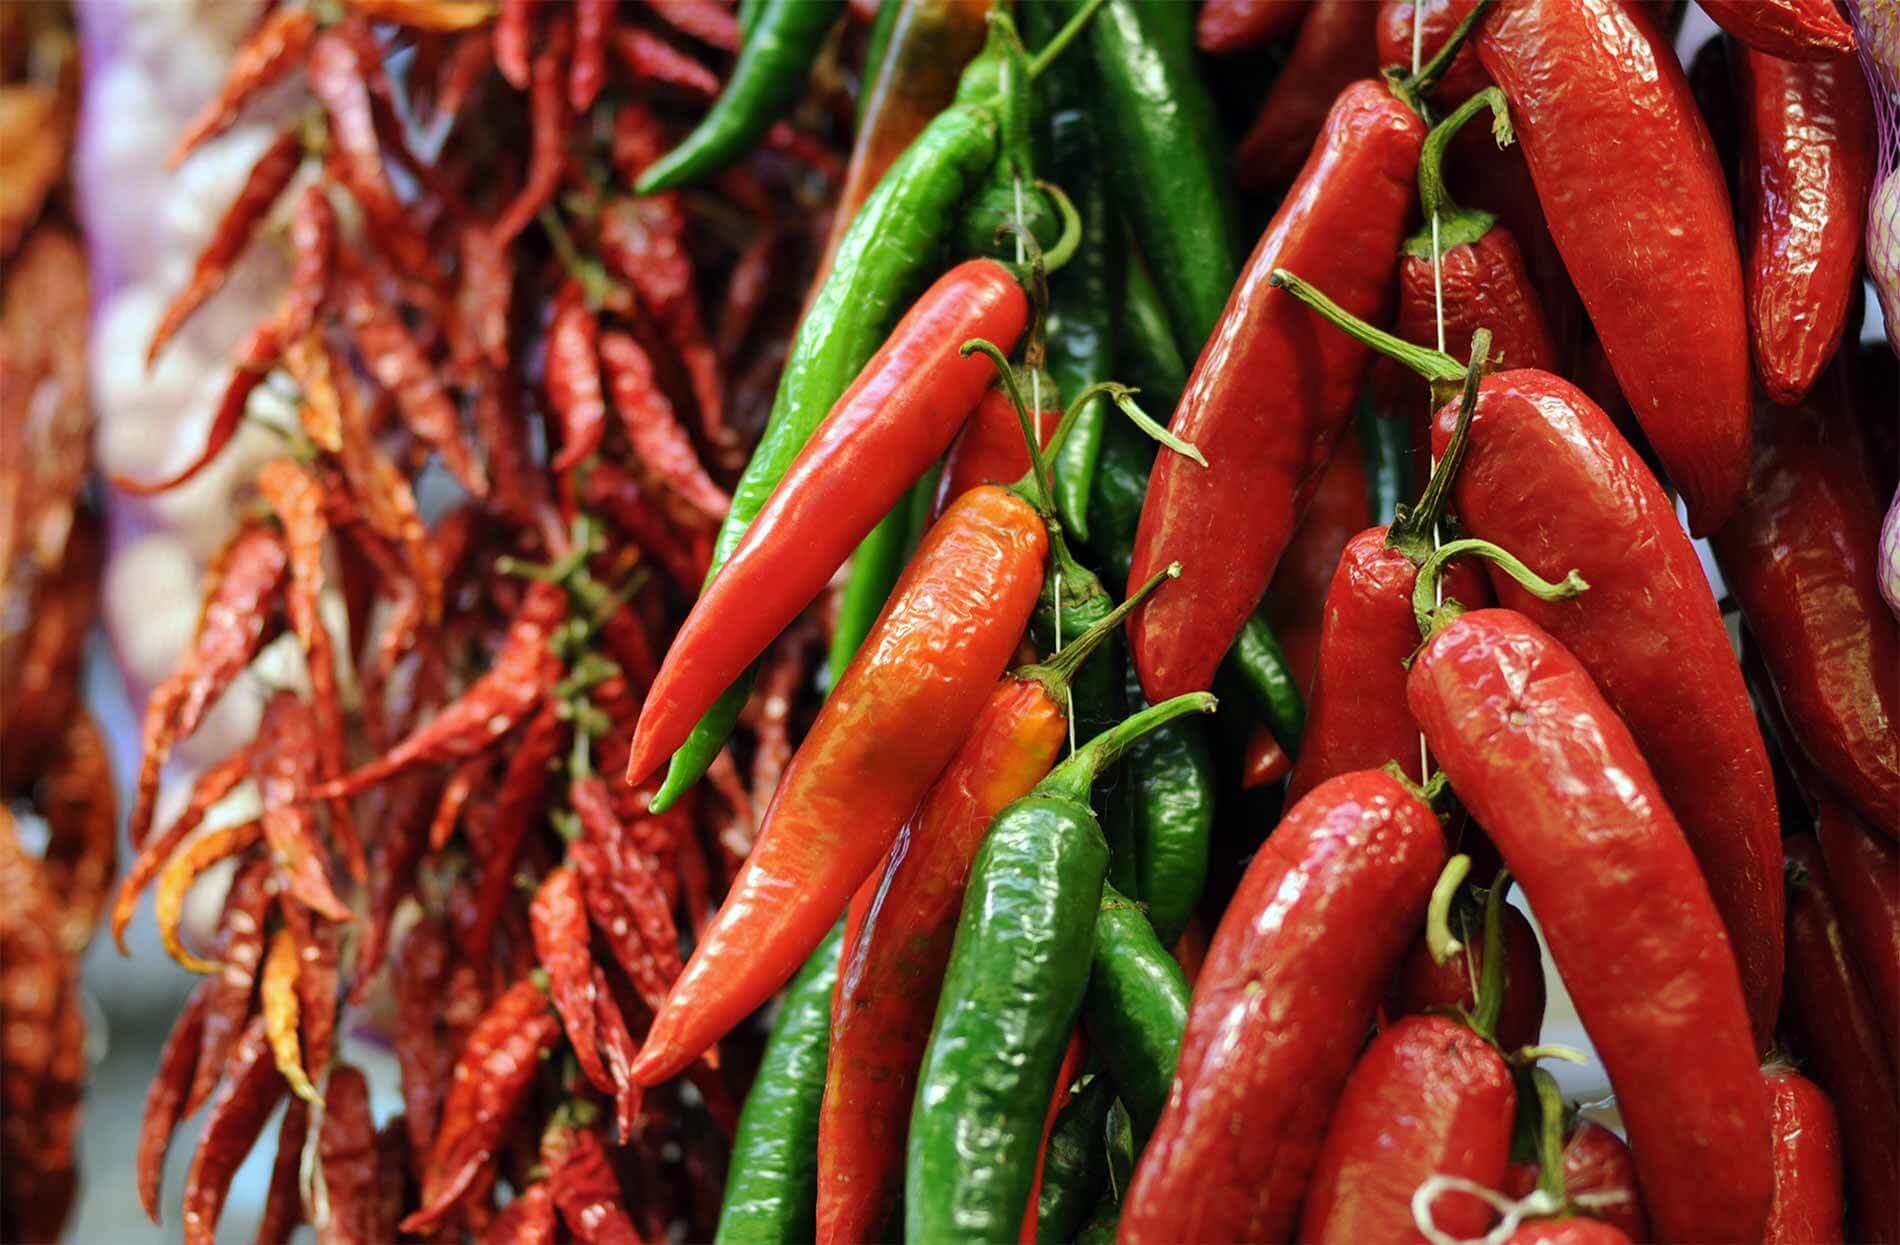 Chilies Market 2